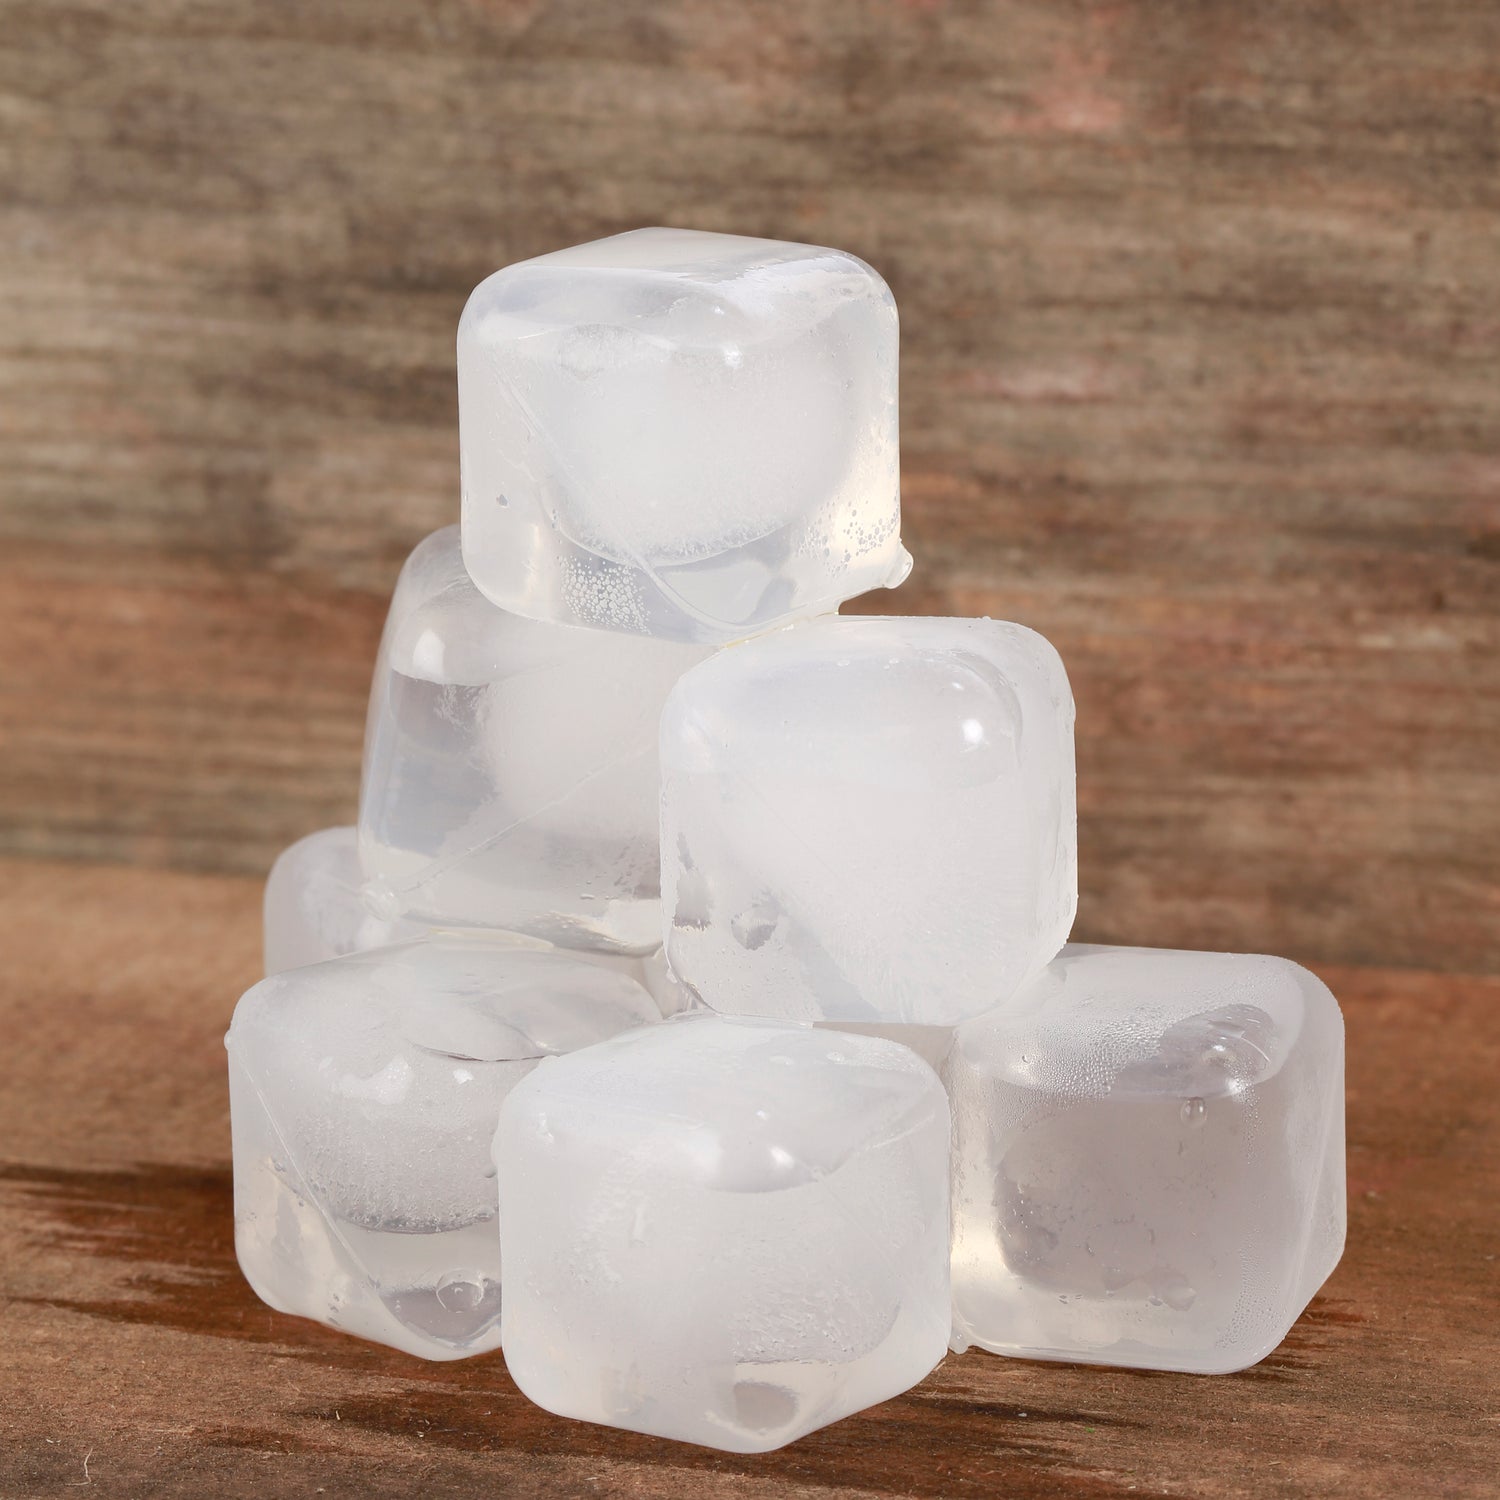 Ice Cubes Template Reusable Ice Cube Molds for Home Decoration